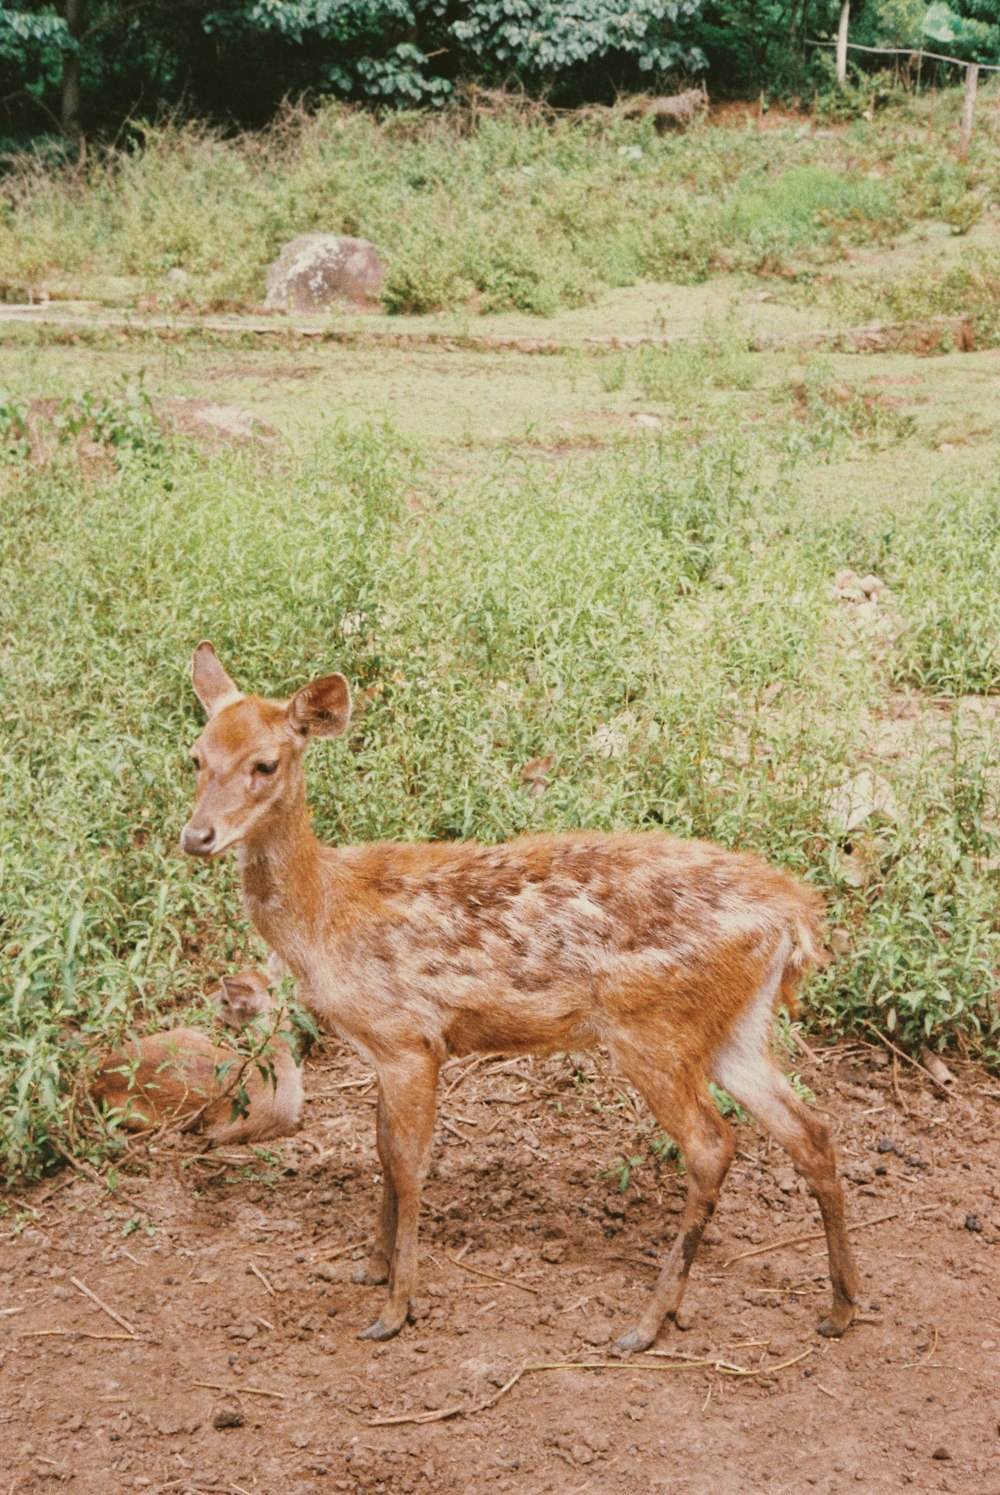 a young deer standing in a field of grass